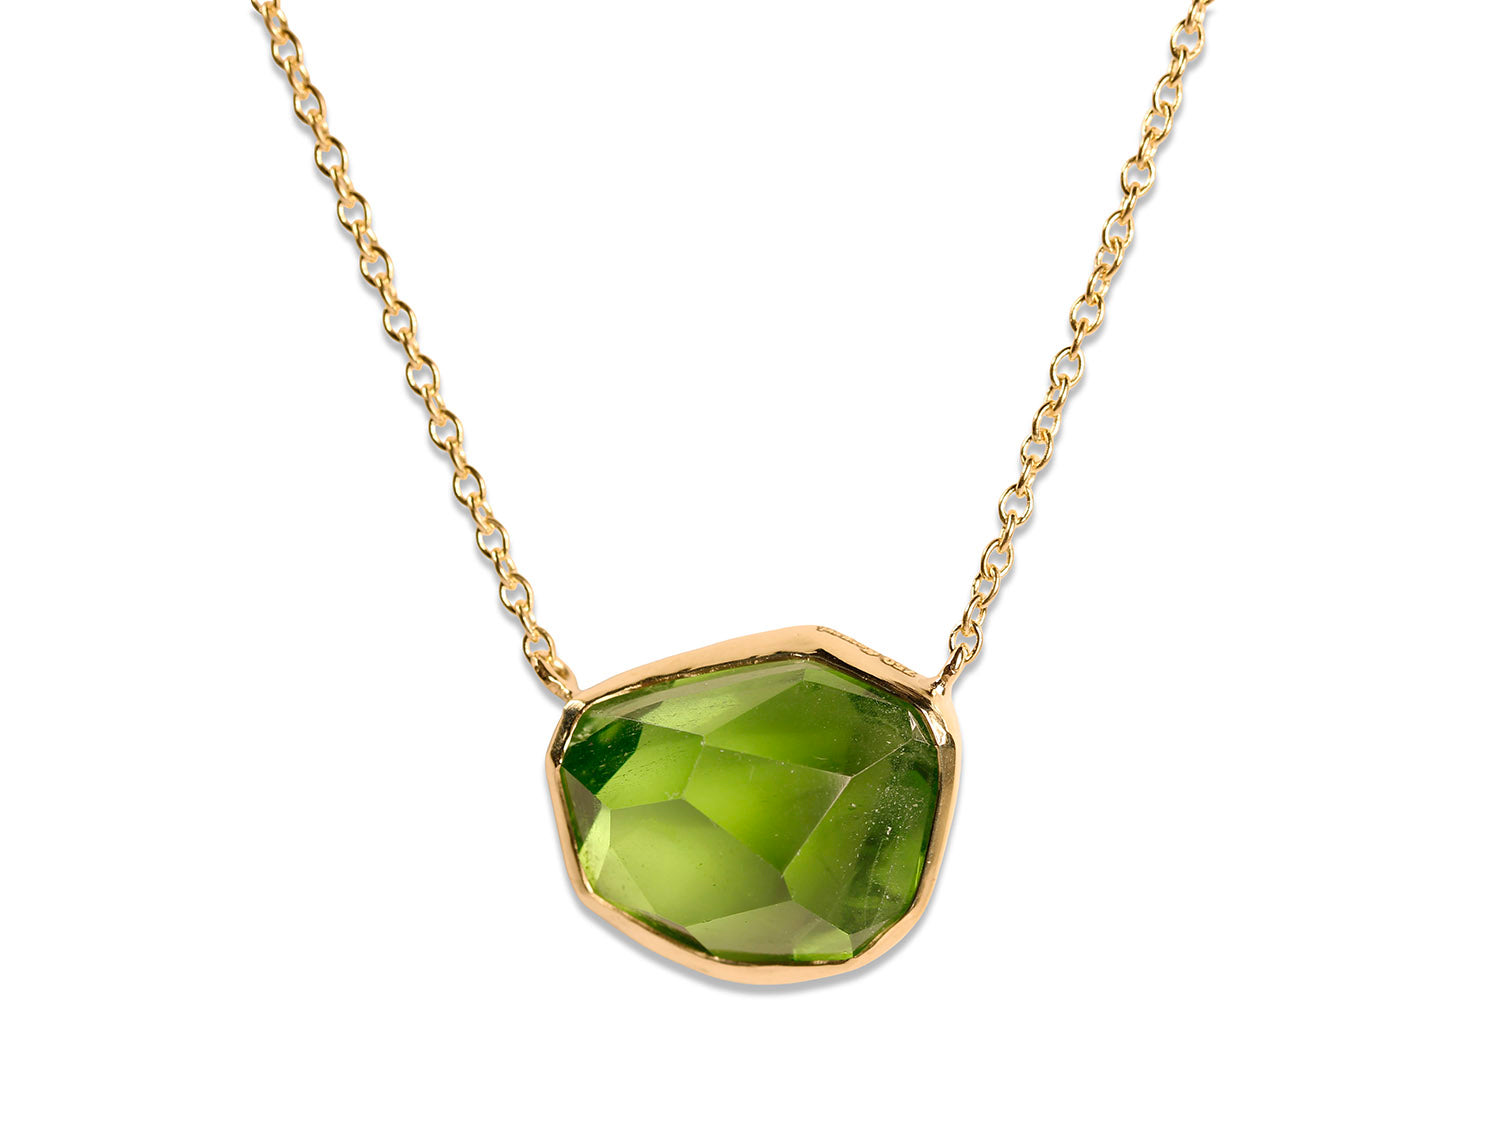 Freeform Peridot Pendant Necklace in 18K Yellow Gold